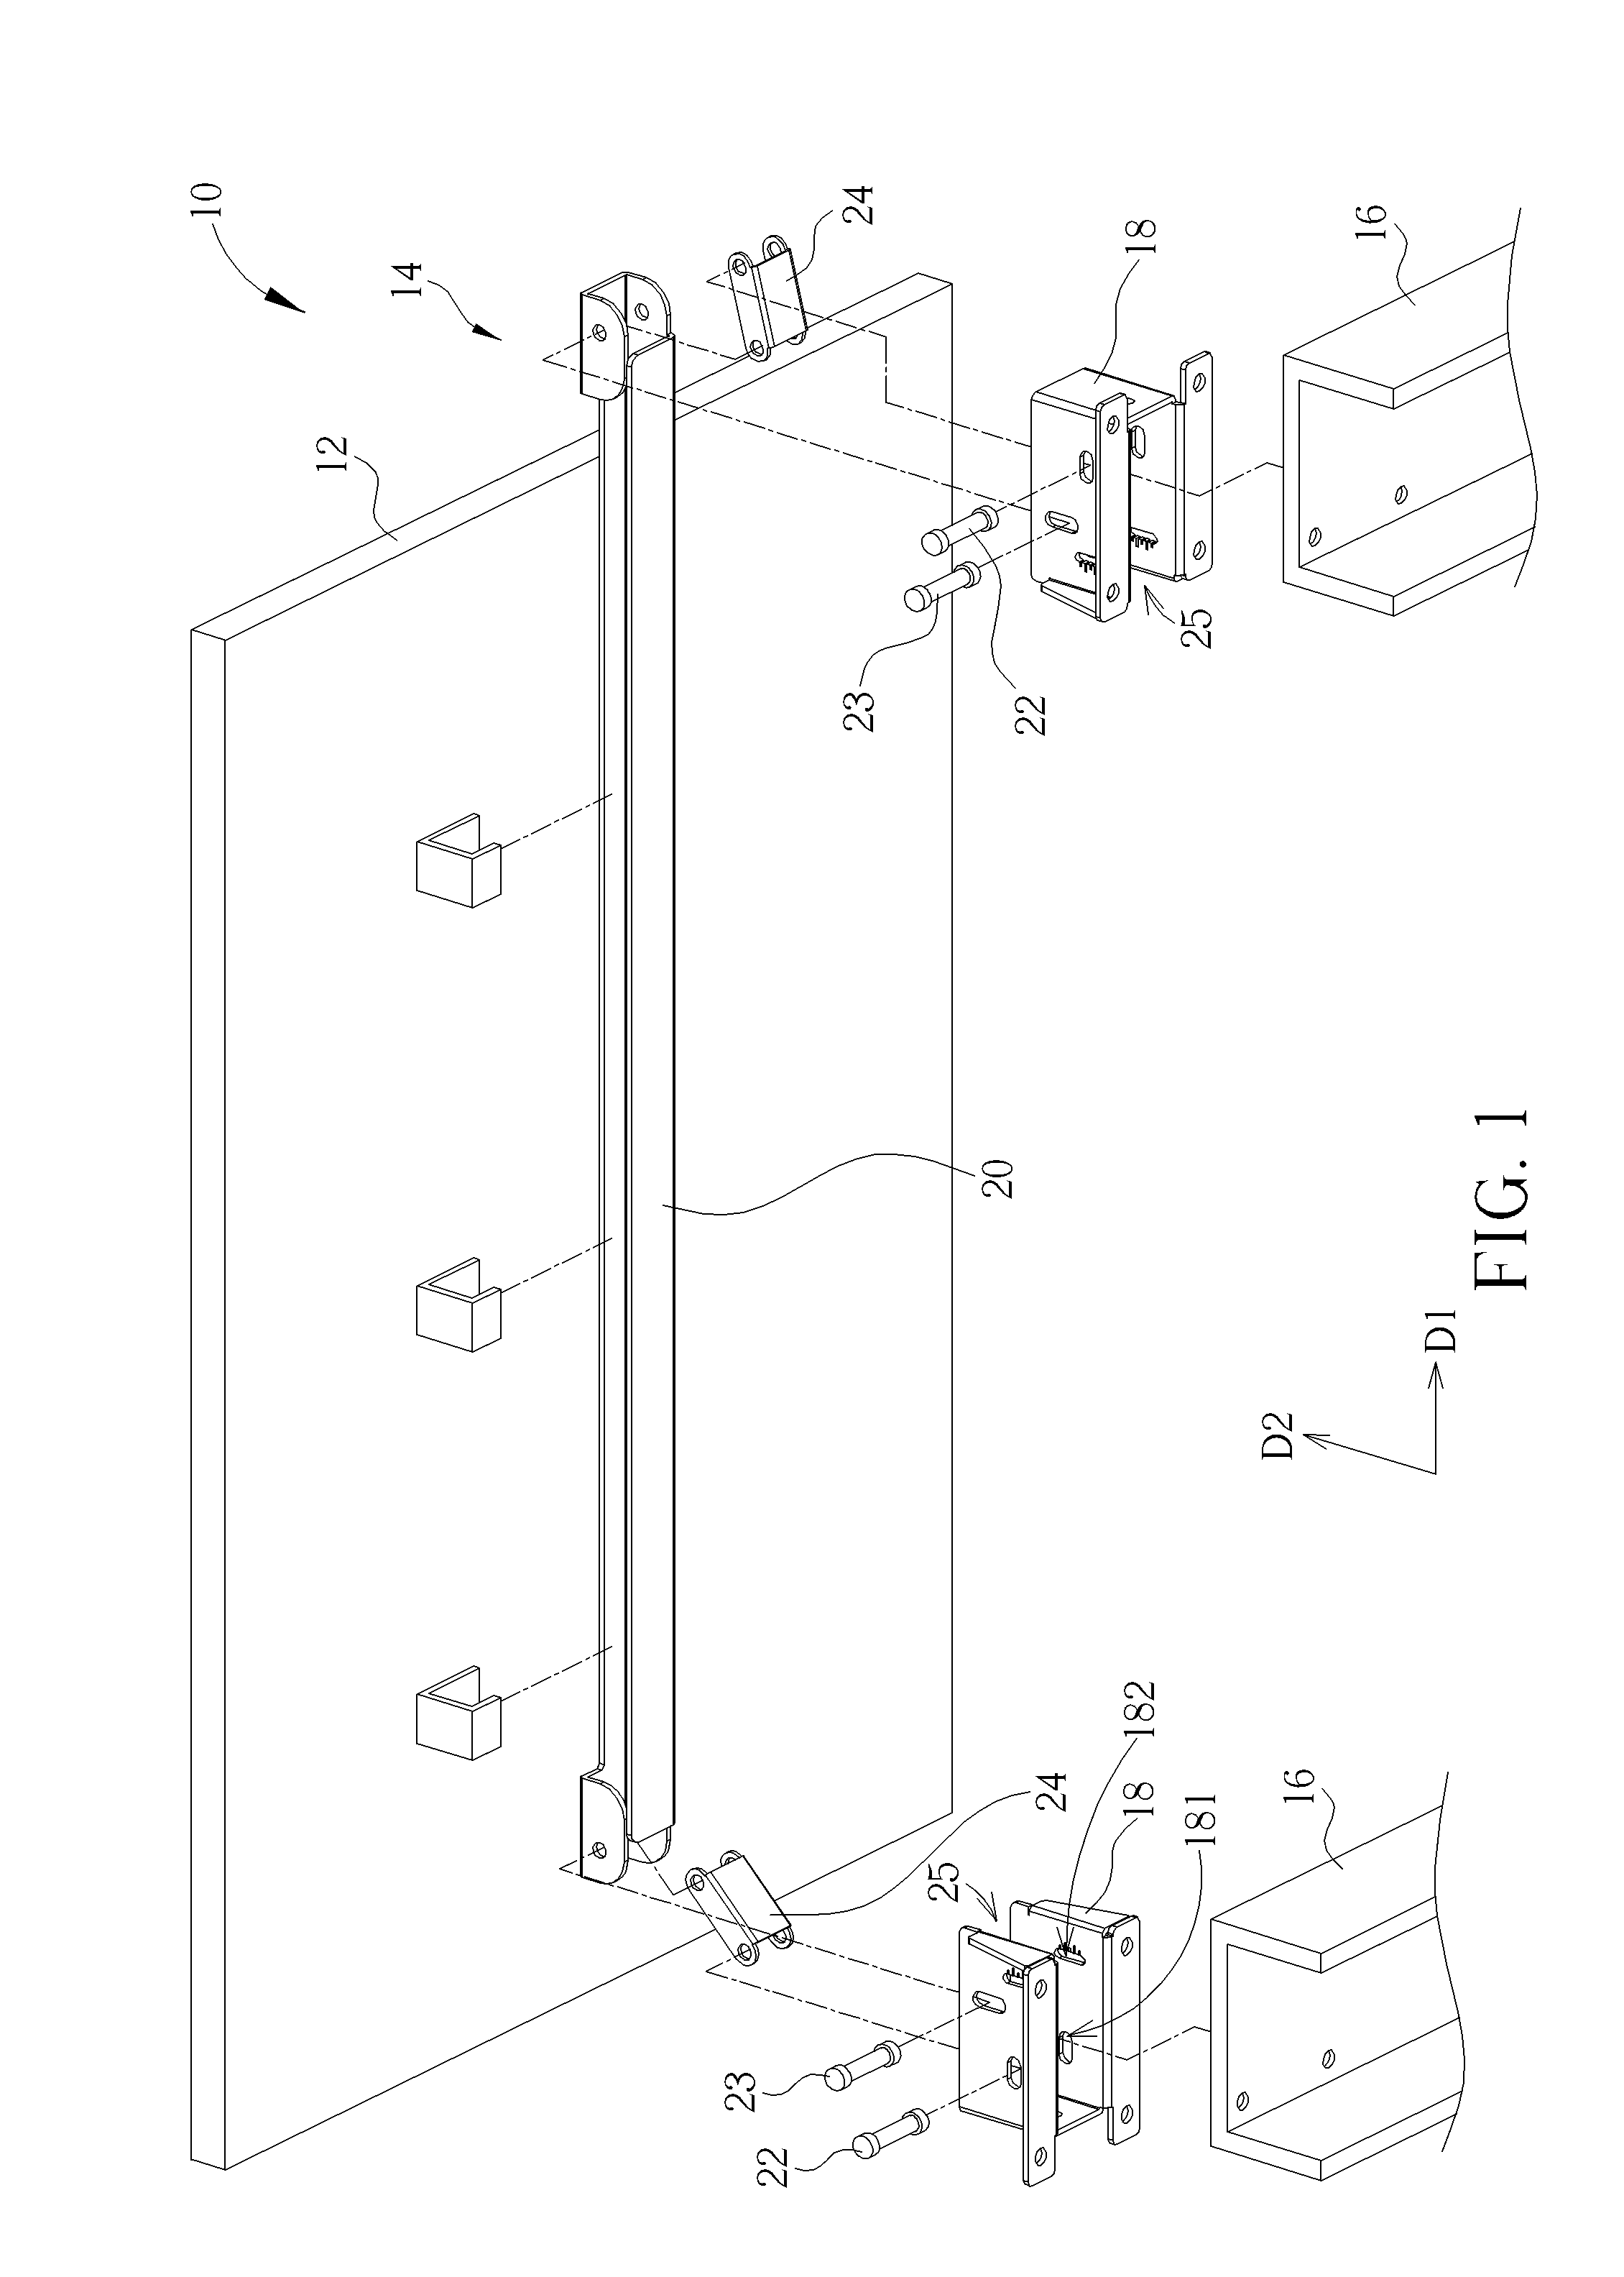 Adjusting mechanism for a display and related mounting system